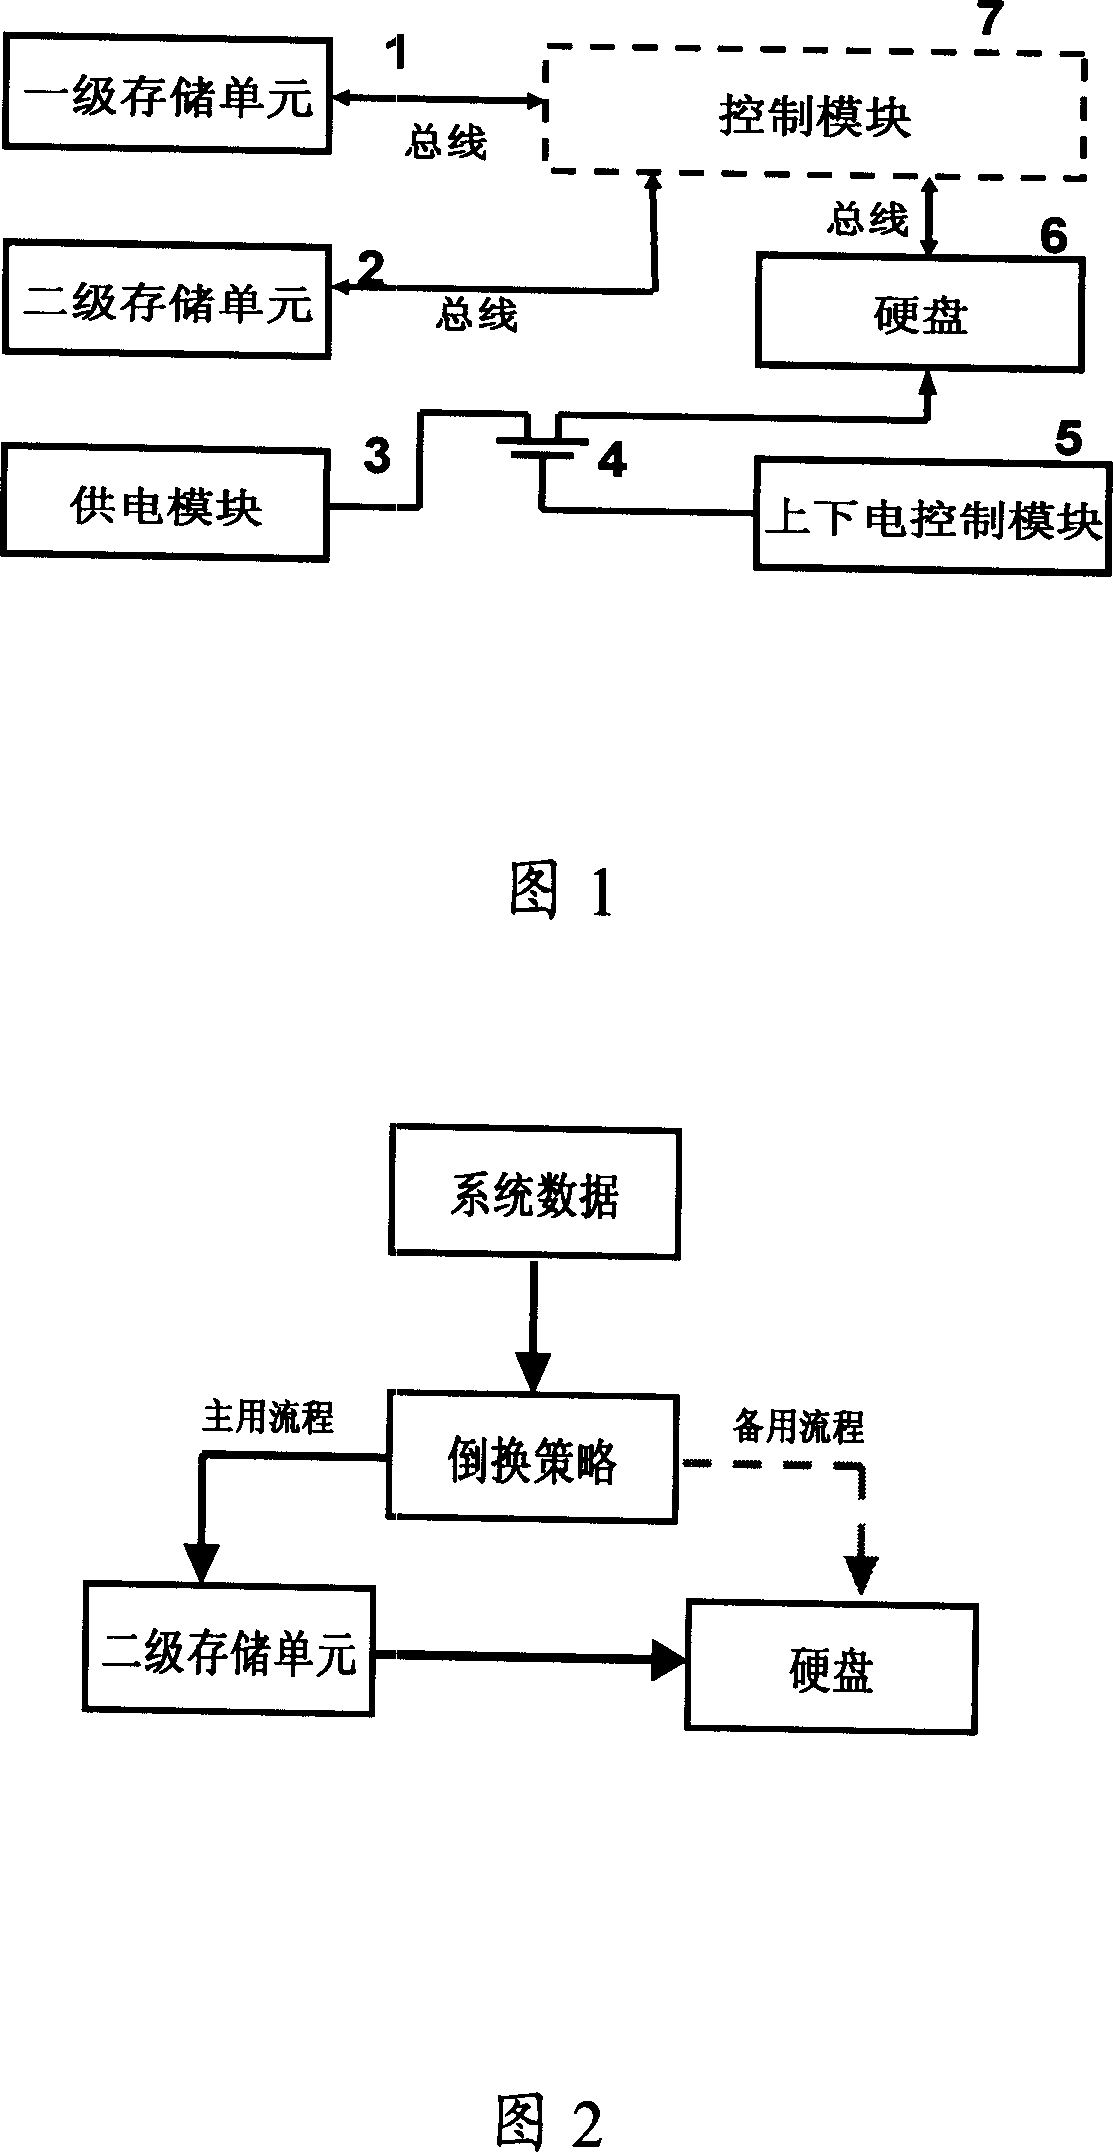 Multi-level buffering type memory system and method therefor